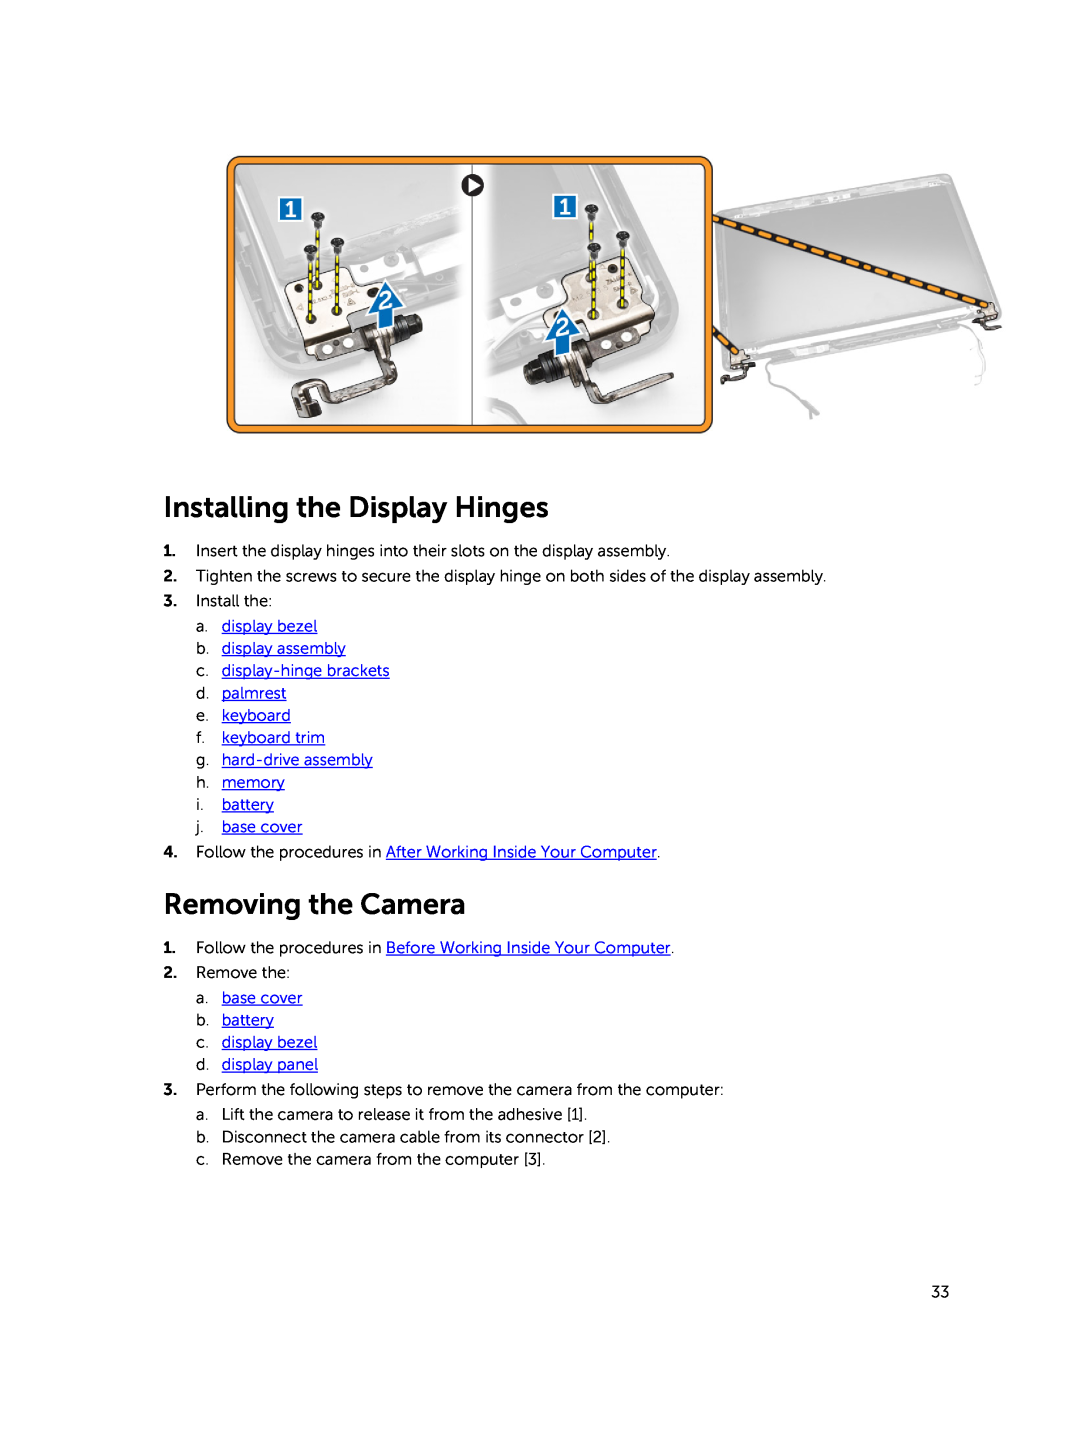 Dell E5450 owner manual Installing the Display Hinges, Removing the Camera 